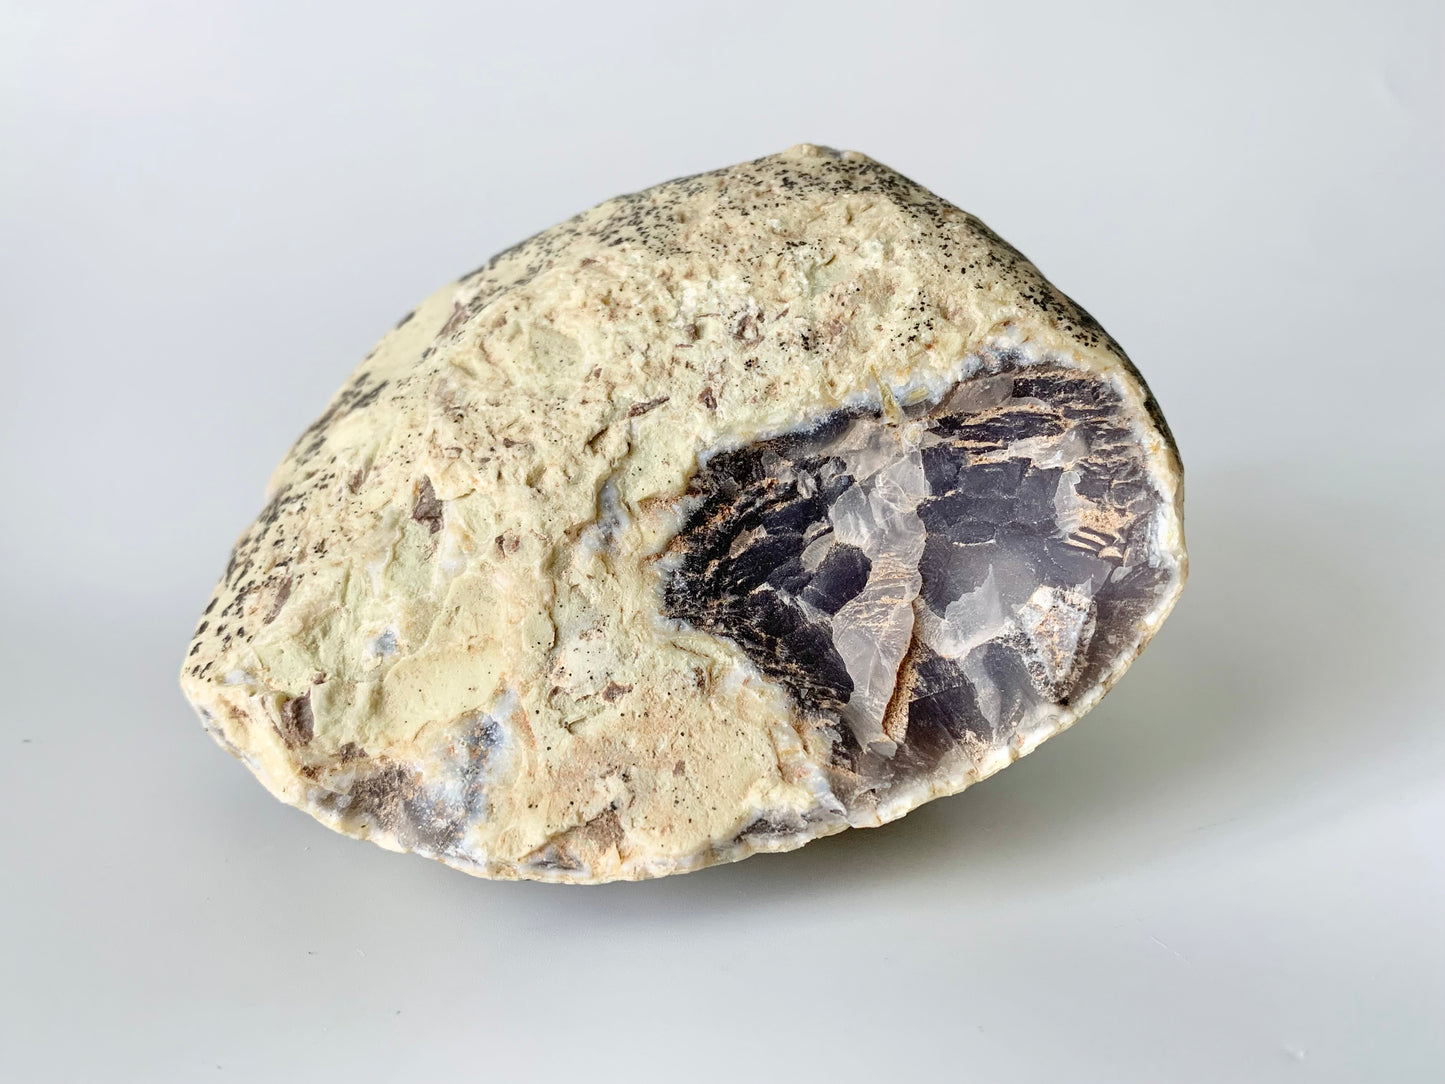 Whole Enhydro Geode/Nodule for Cracking/Cutting